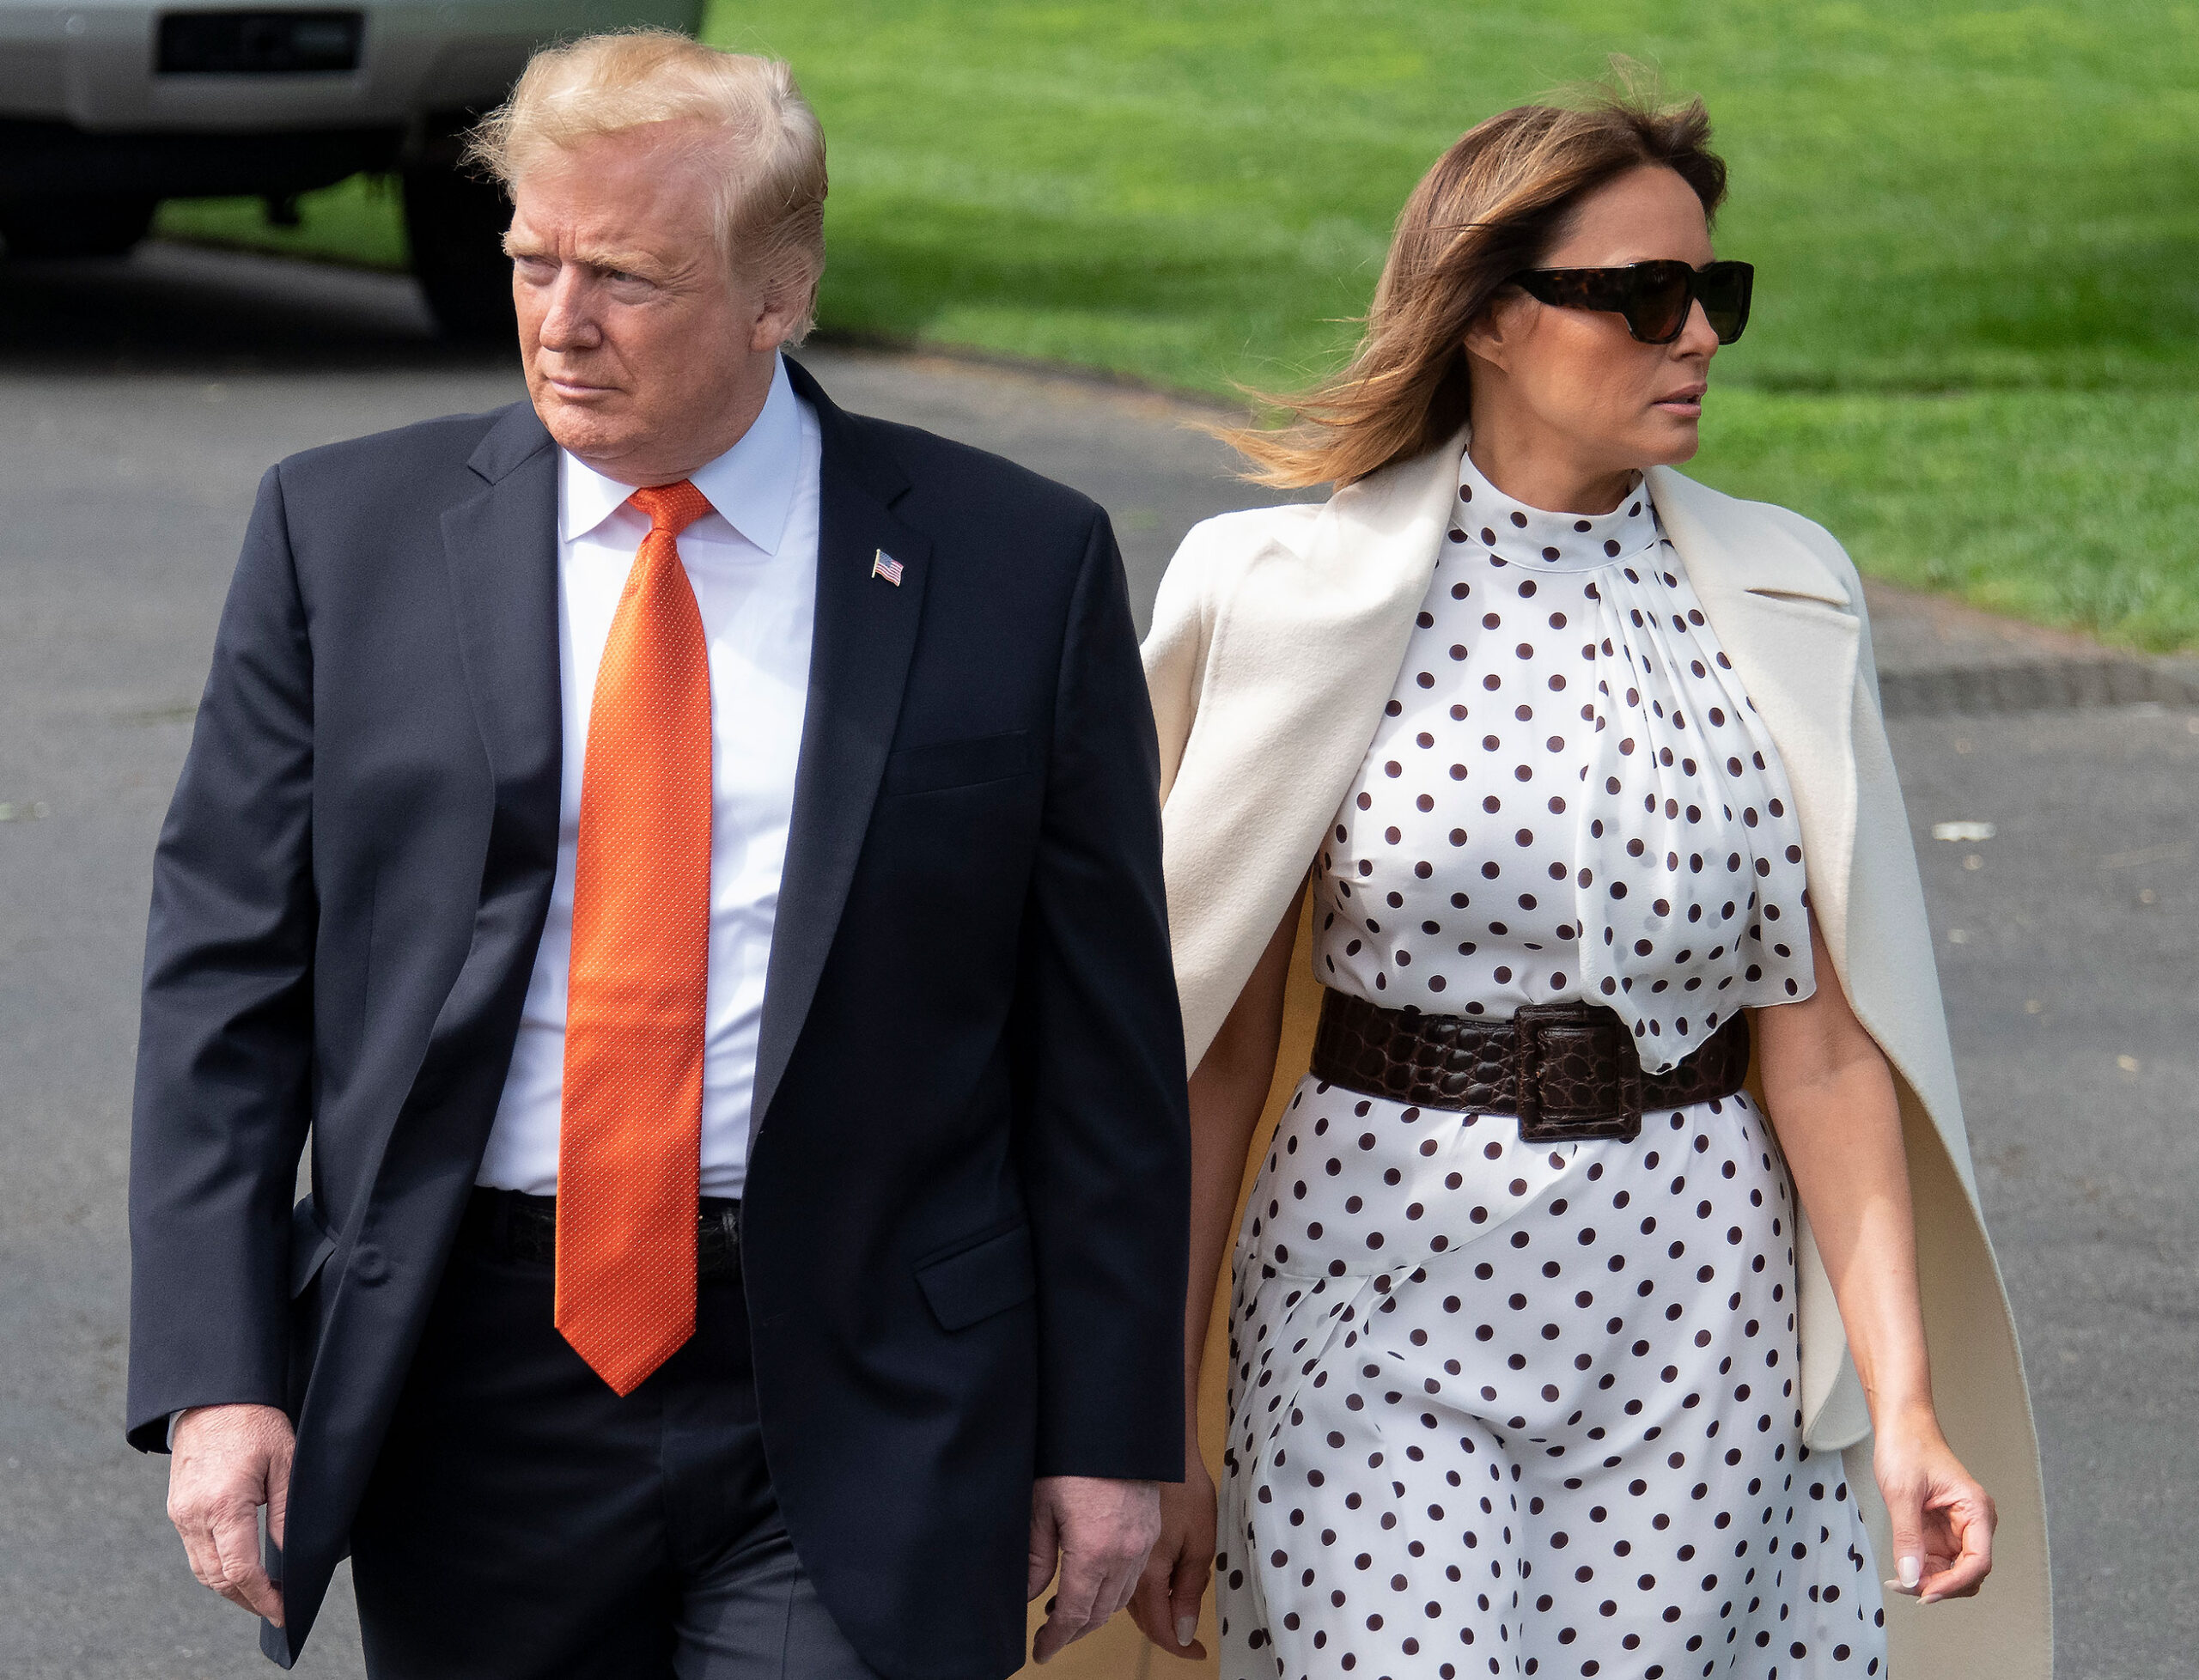 Donald and Melania Trump departing the White House